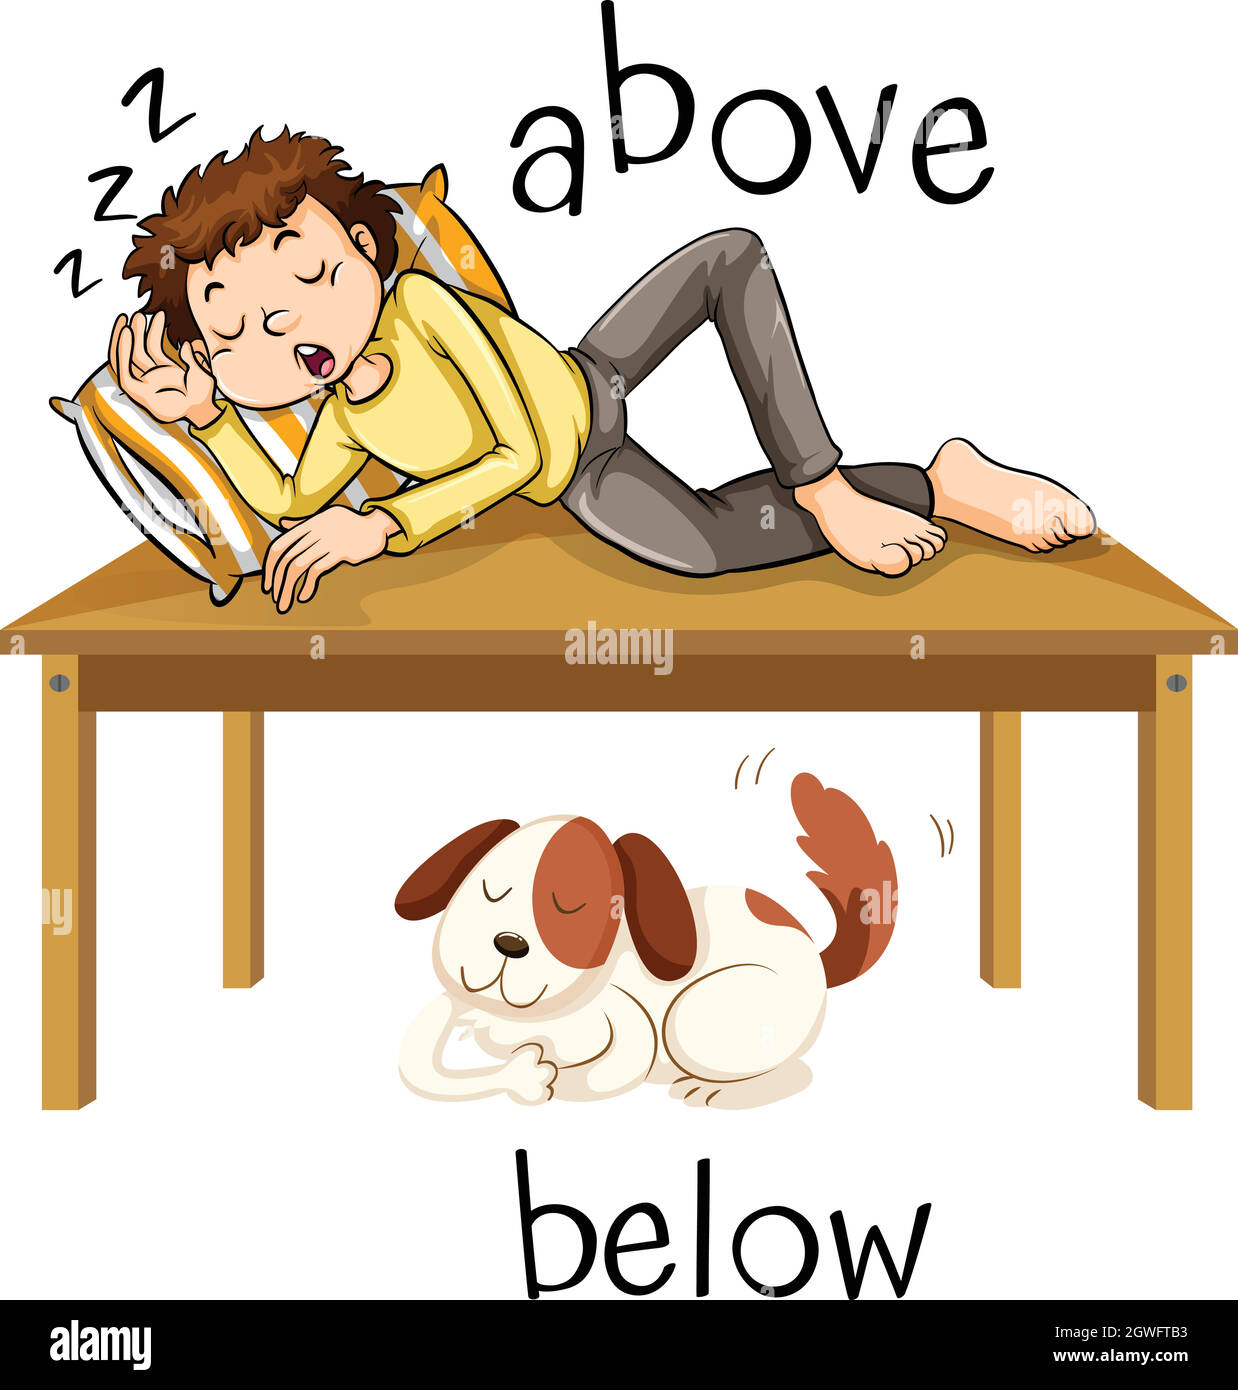 Opposite words for above and below Stock Vector